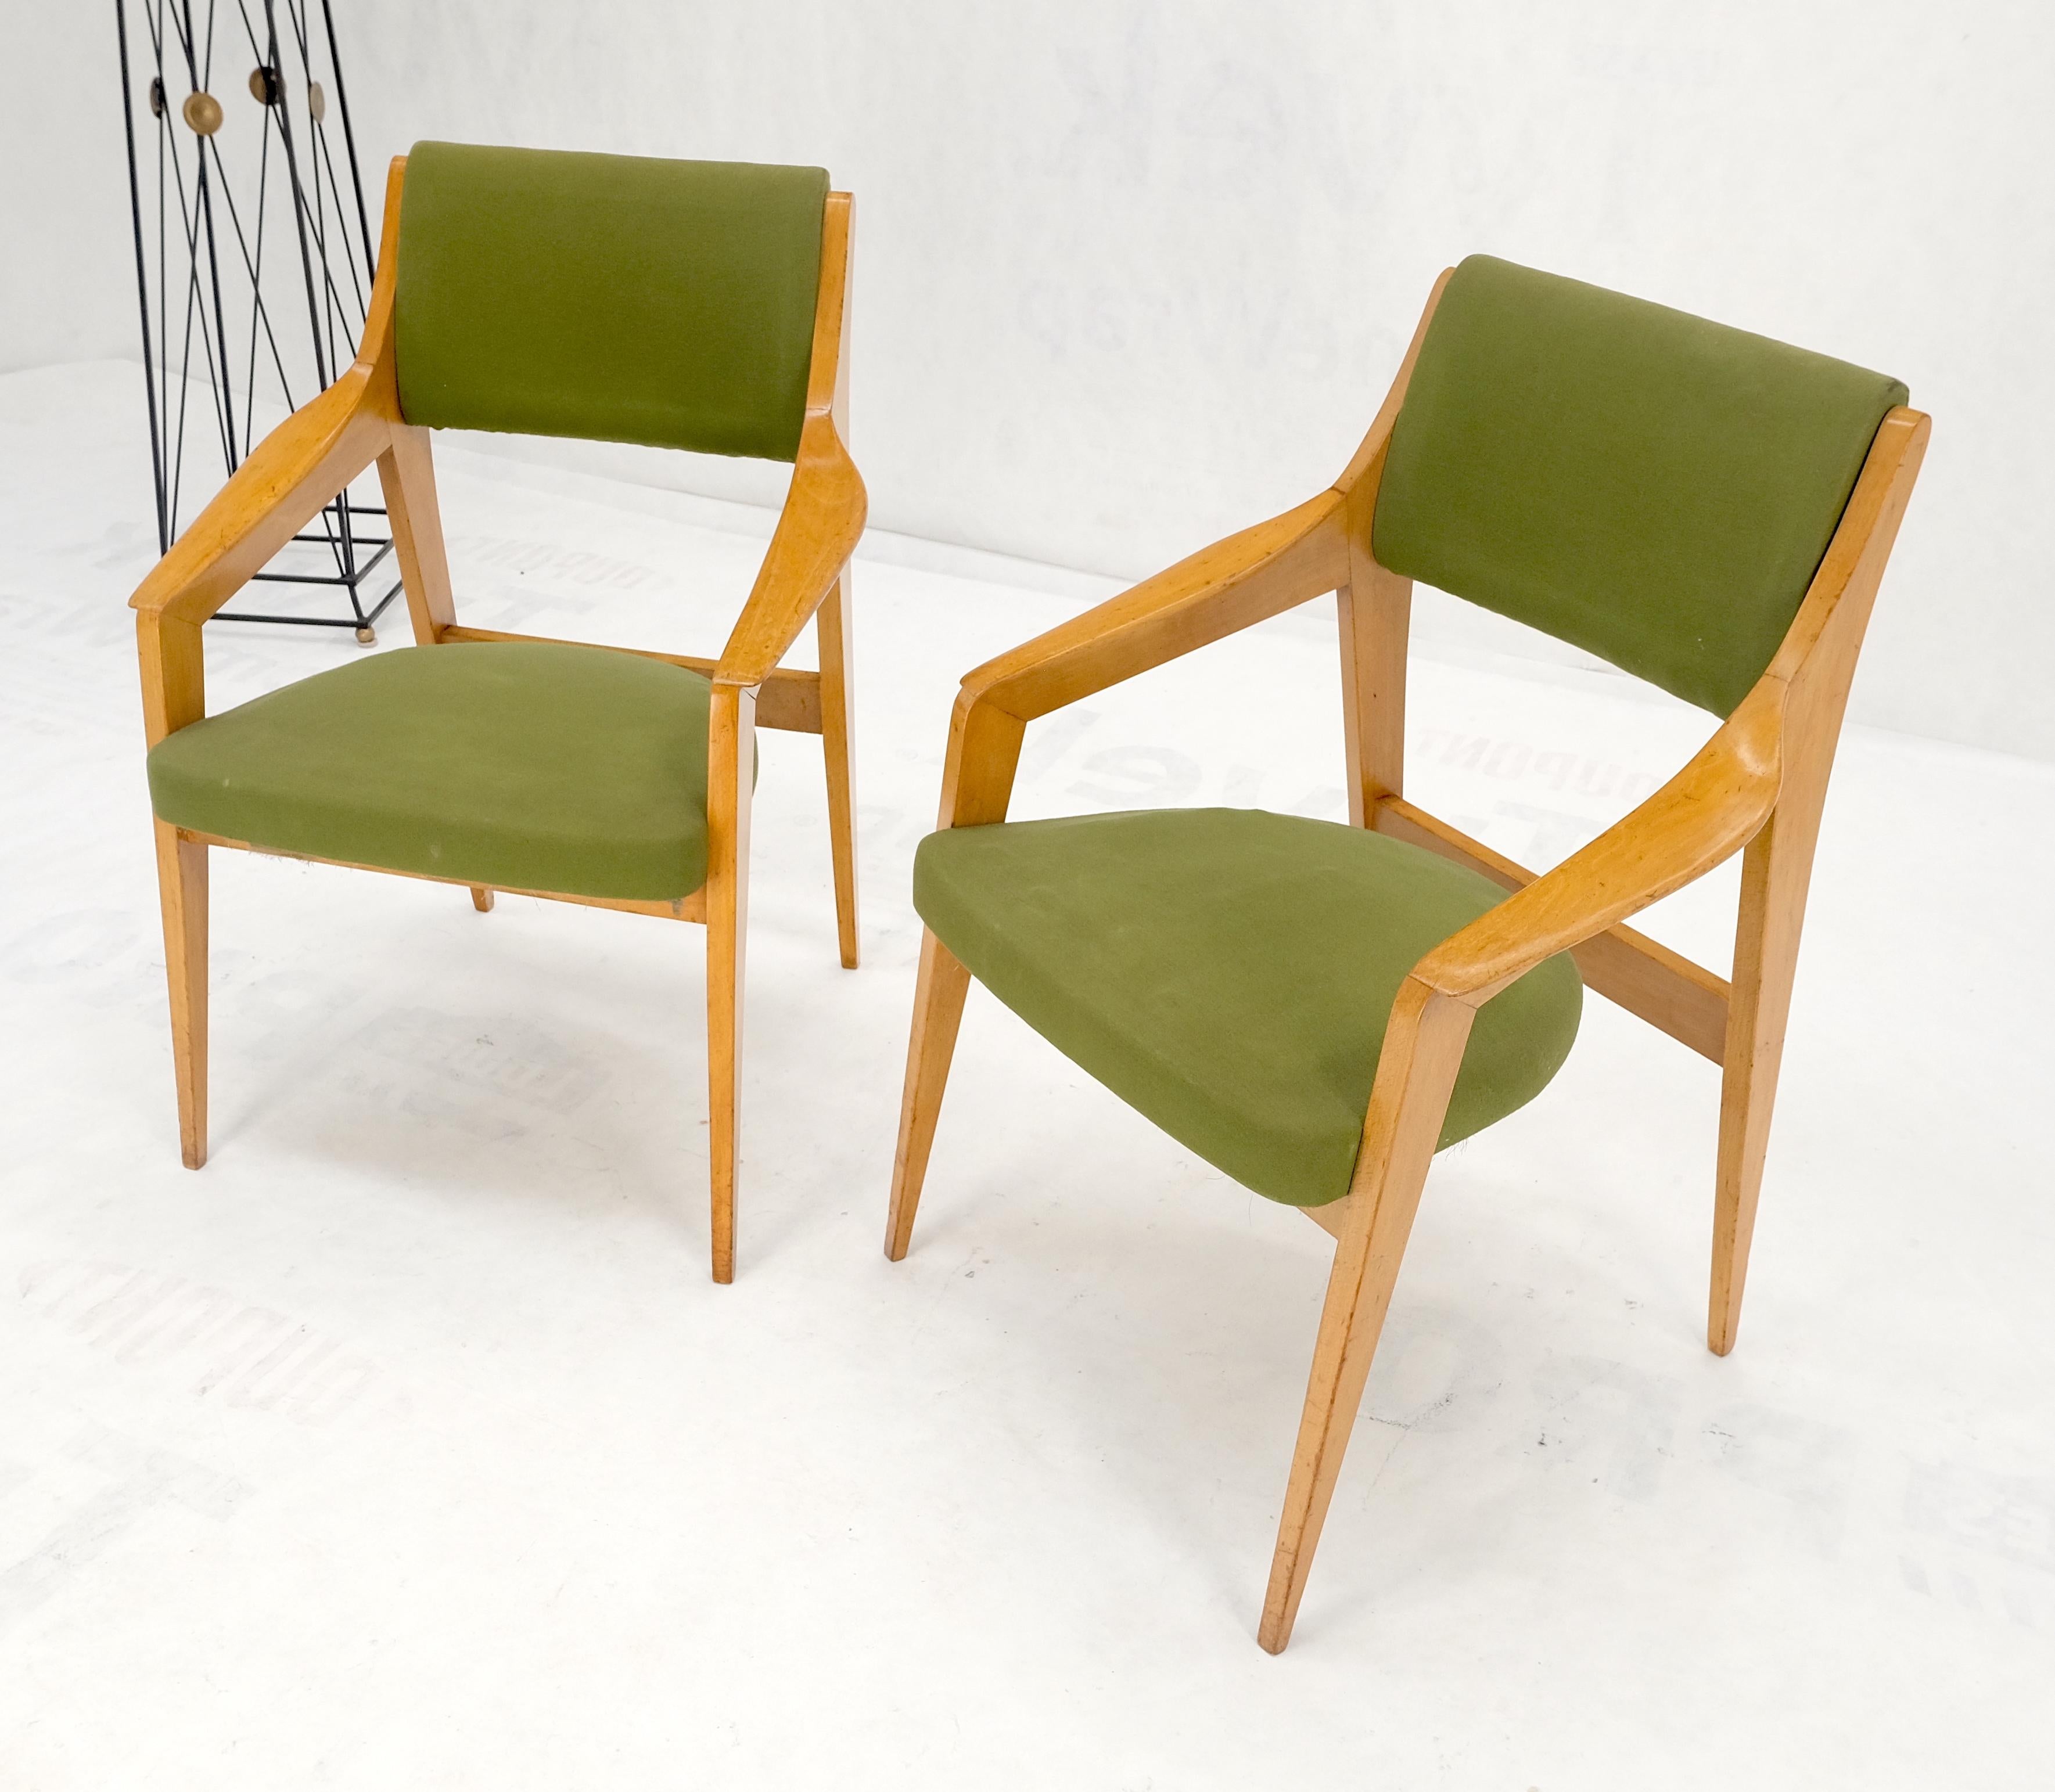 Pair of c1950s Blond Birch Scandinavian Swedish Arm Chairs Green Upholstery For Sale 5